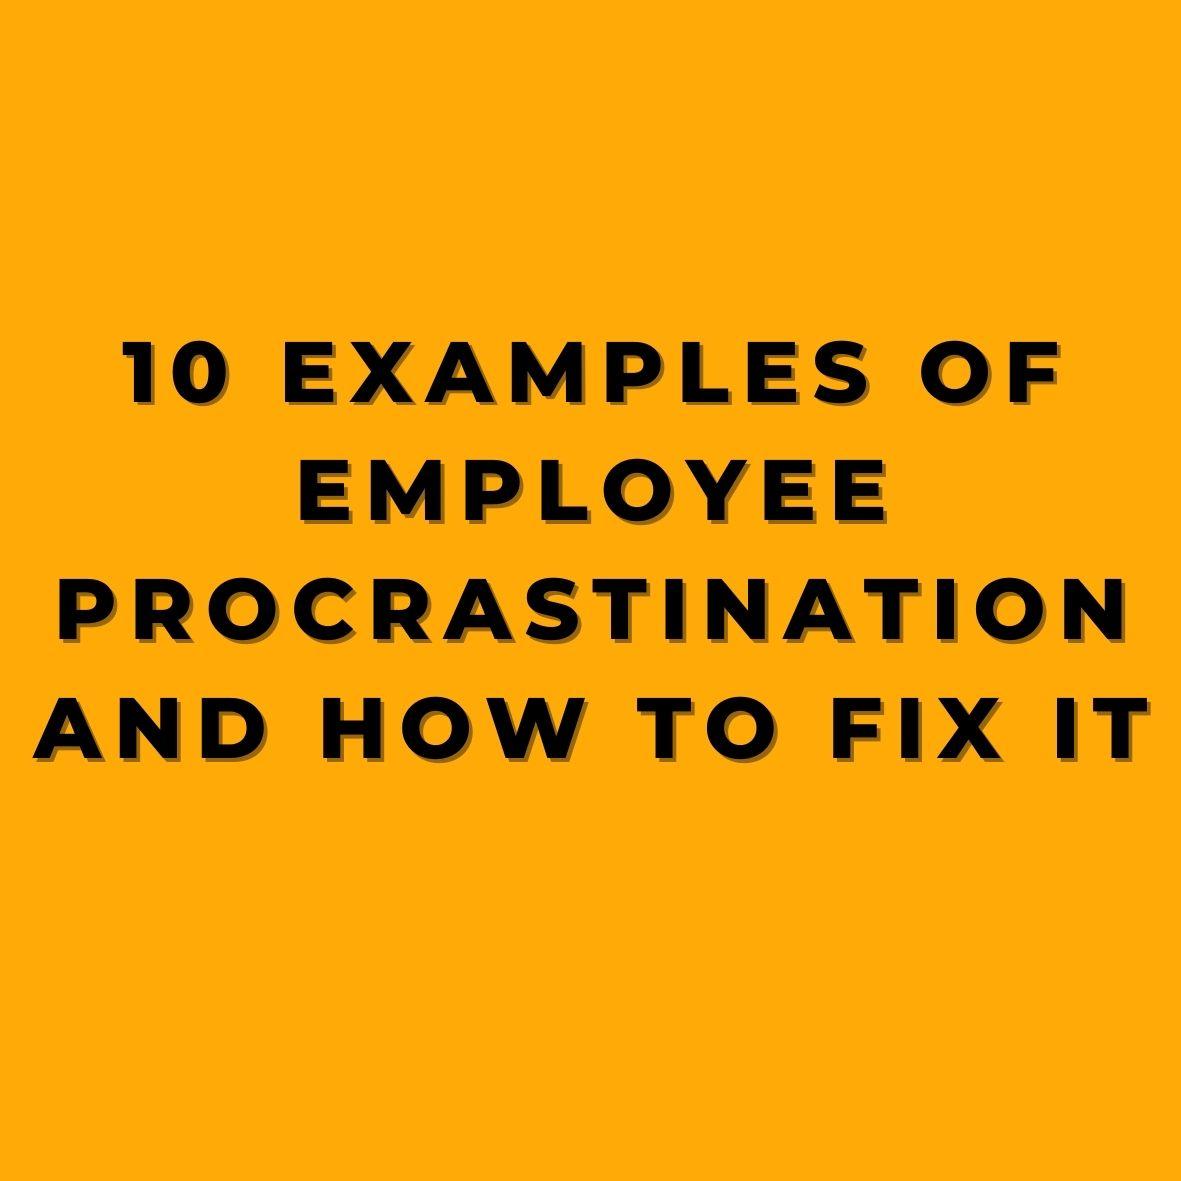 10_Examples_of_Employee_Procrastination_and_How_to_Fix_it